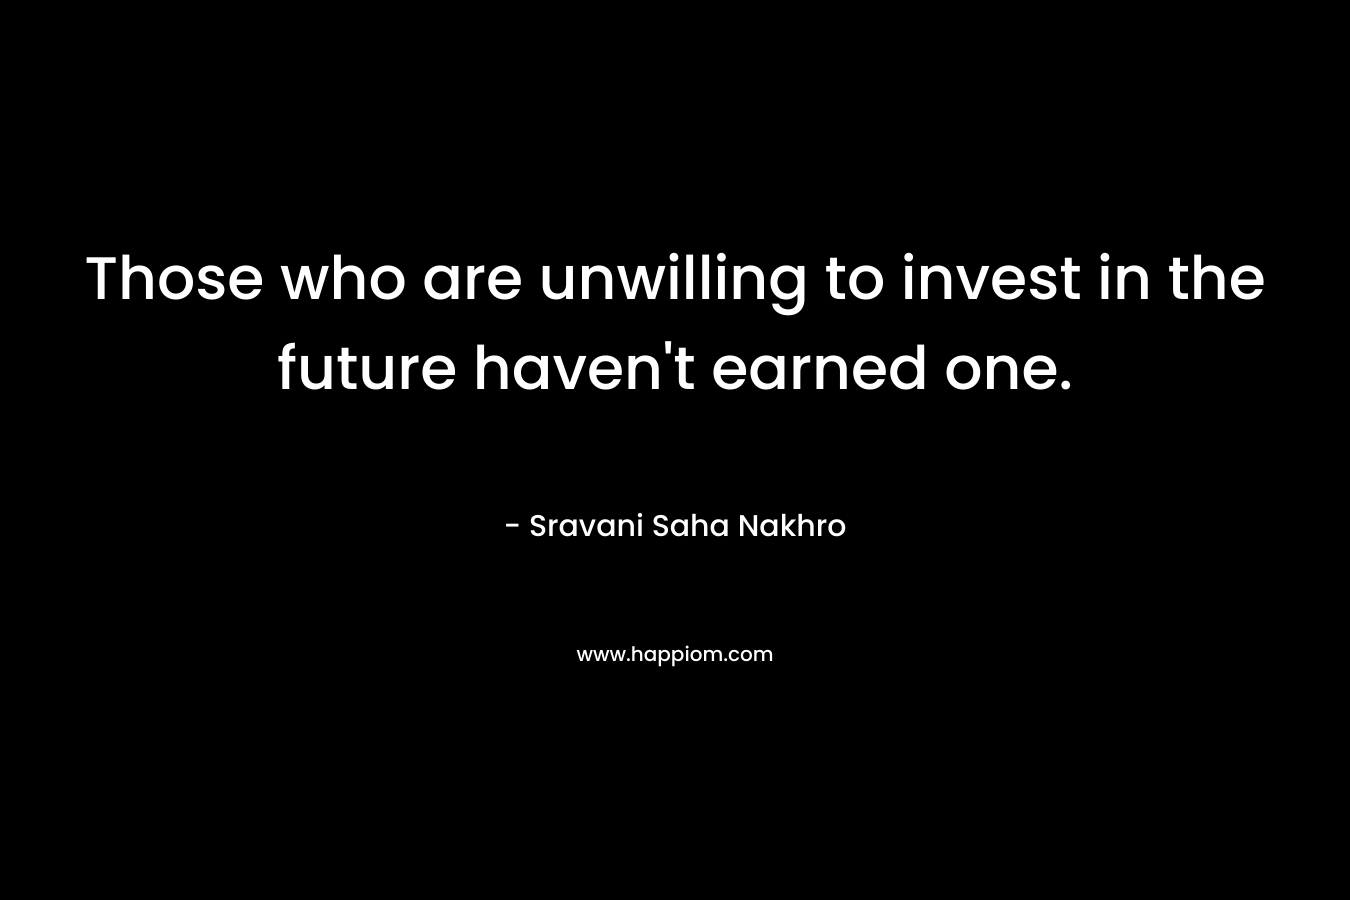 Those who are unwilling to invest in the future haven't earned one.